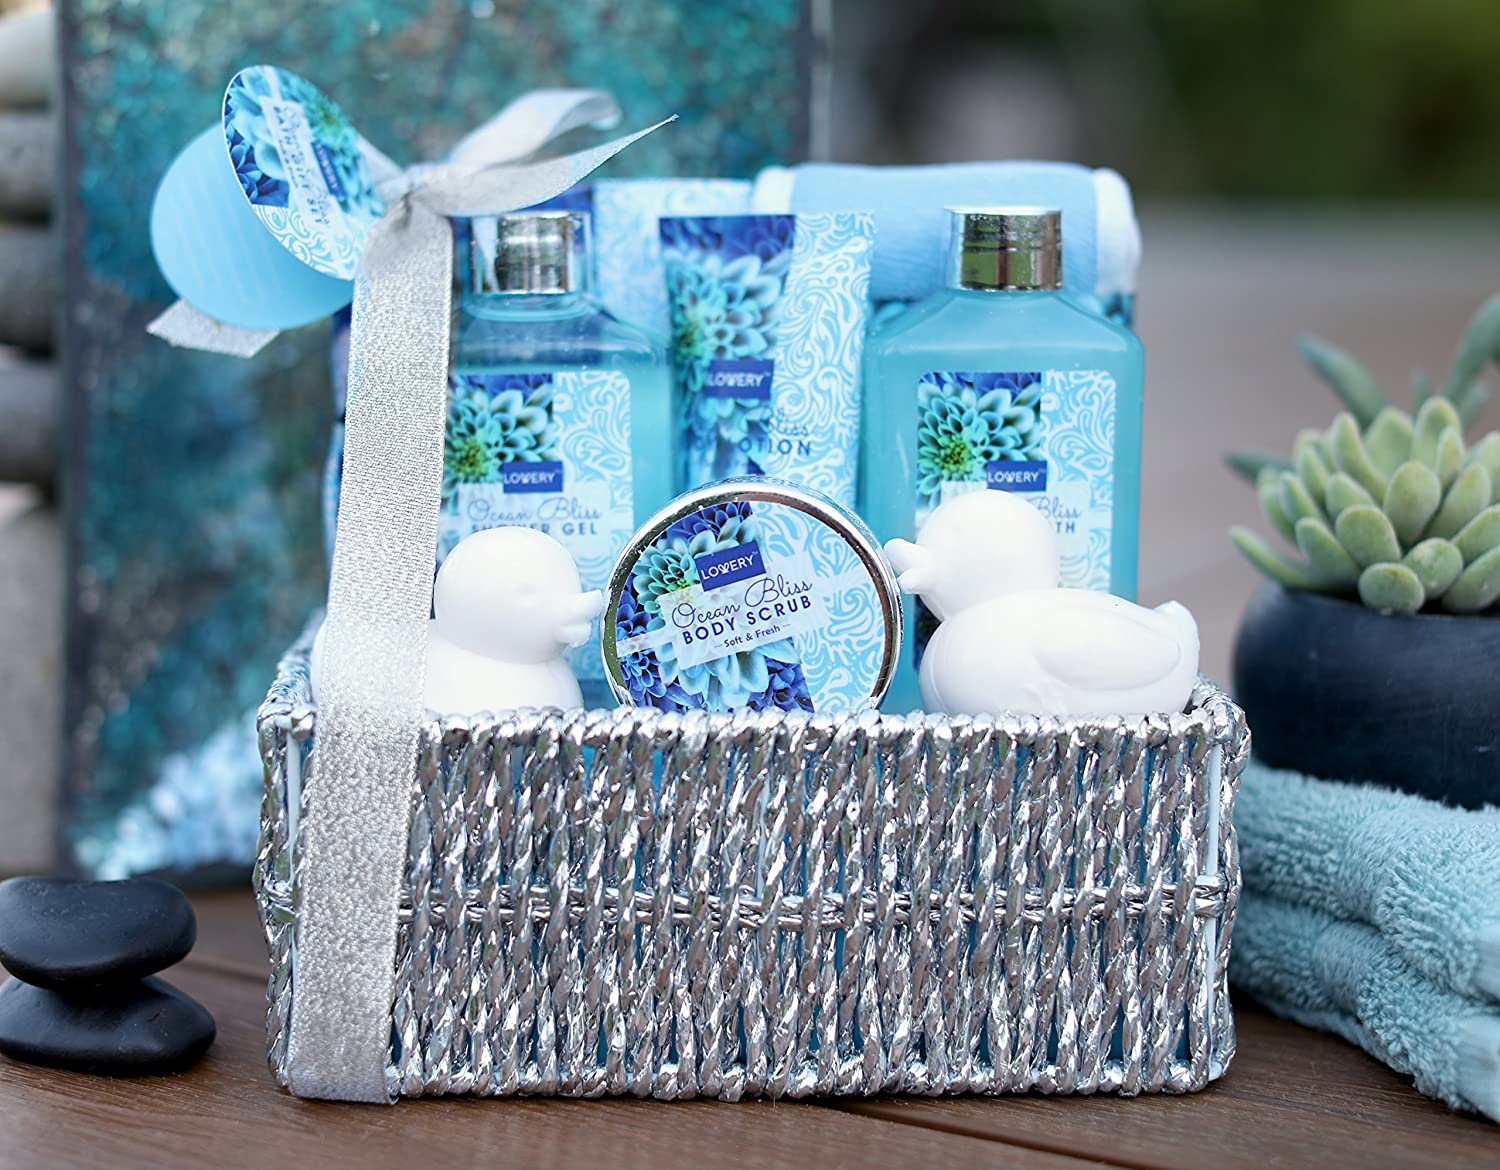 Spa Day Kit, Spa Kit for Women Gift Set, Home Spa Kit, Spa Baskets for Mothers Day, Mothers Day Relaxation Gifts, at Home Spa Package, Pampering